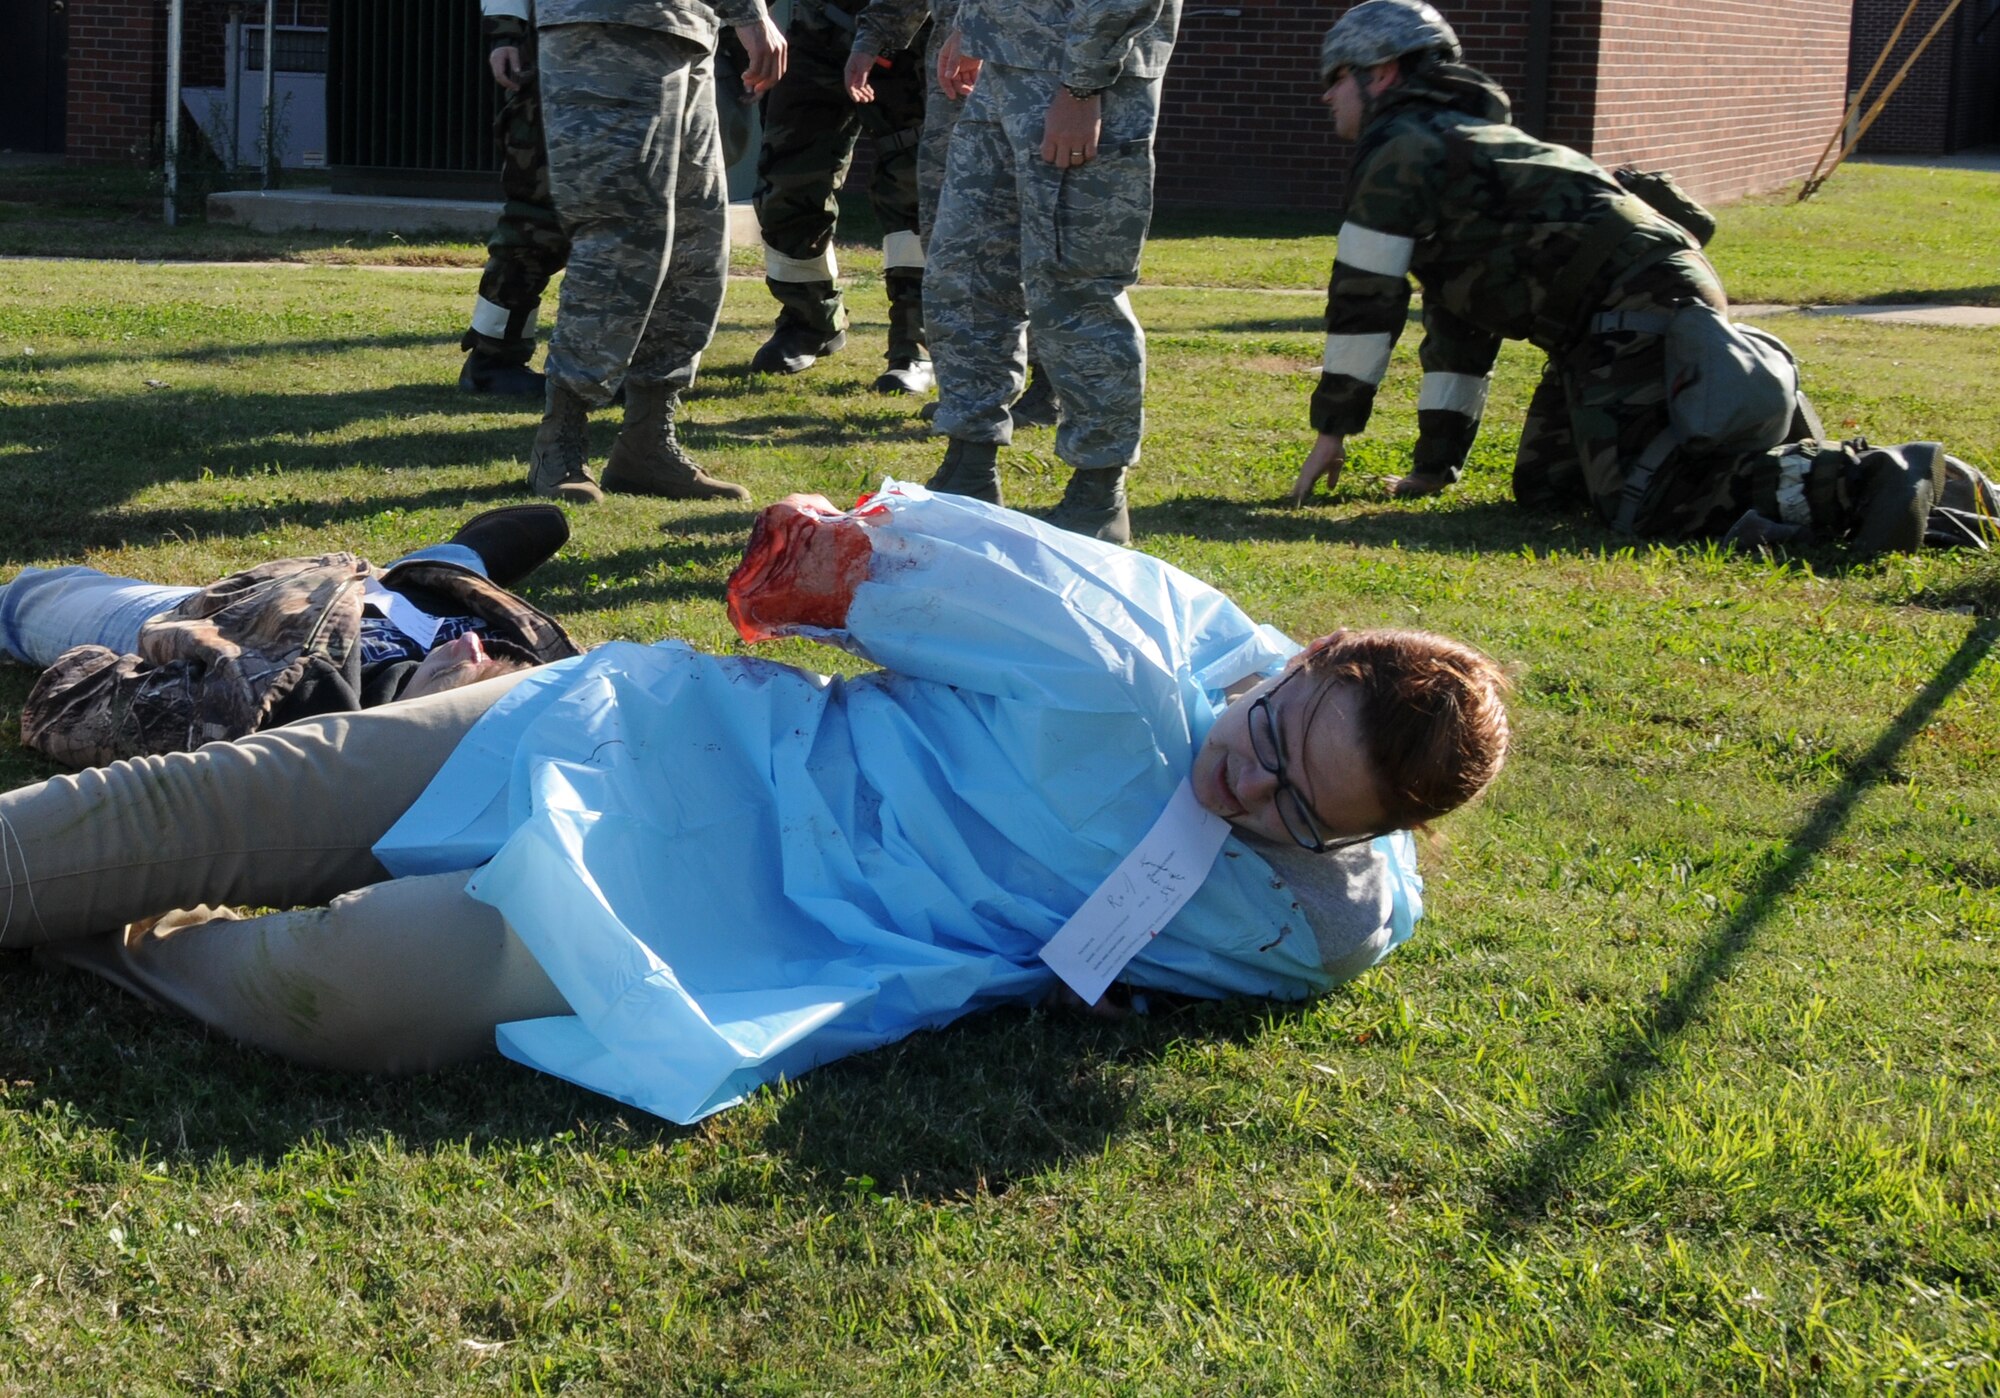 Members of the 188th Student Flight role play as victims of a simulated rocket attack during a mass casualty exercise at Ebbing Air National Guard Base, Fort Smith, Ark., Nov. 2, 2014. The purpose of the exercise was to test Airmen’s ability to triage personnel while facing possible attacks. (U.S. Air National Guard photo by Airman 1st Class Cody Martin/Released)